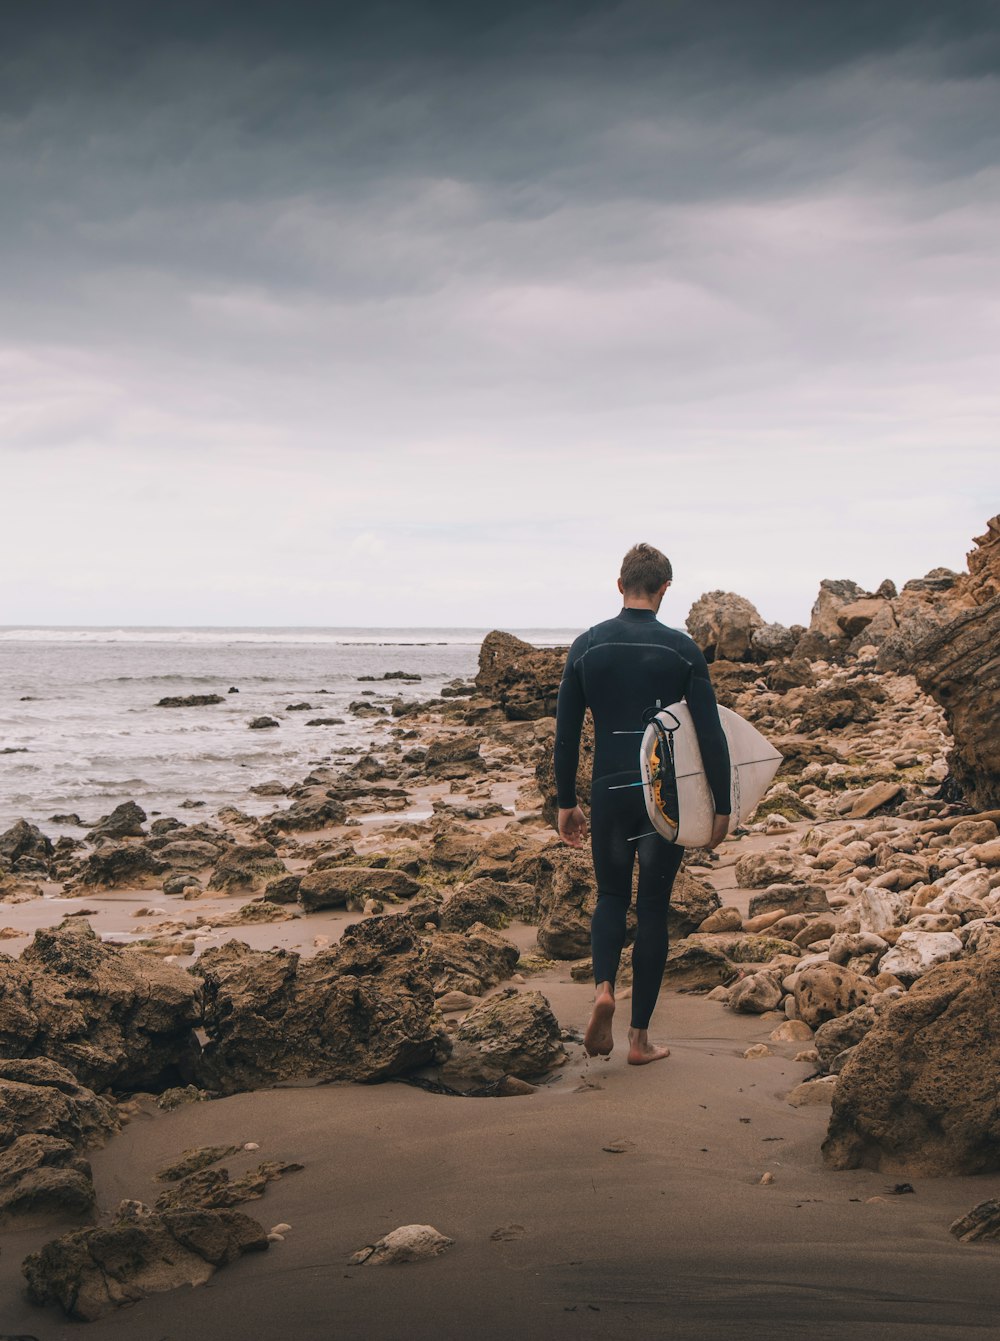 a man in a wet suit carrying a surfboard on a rocky beach